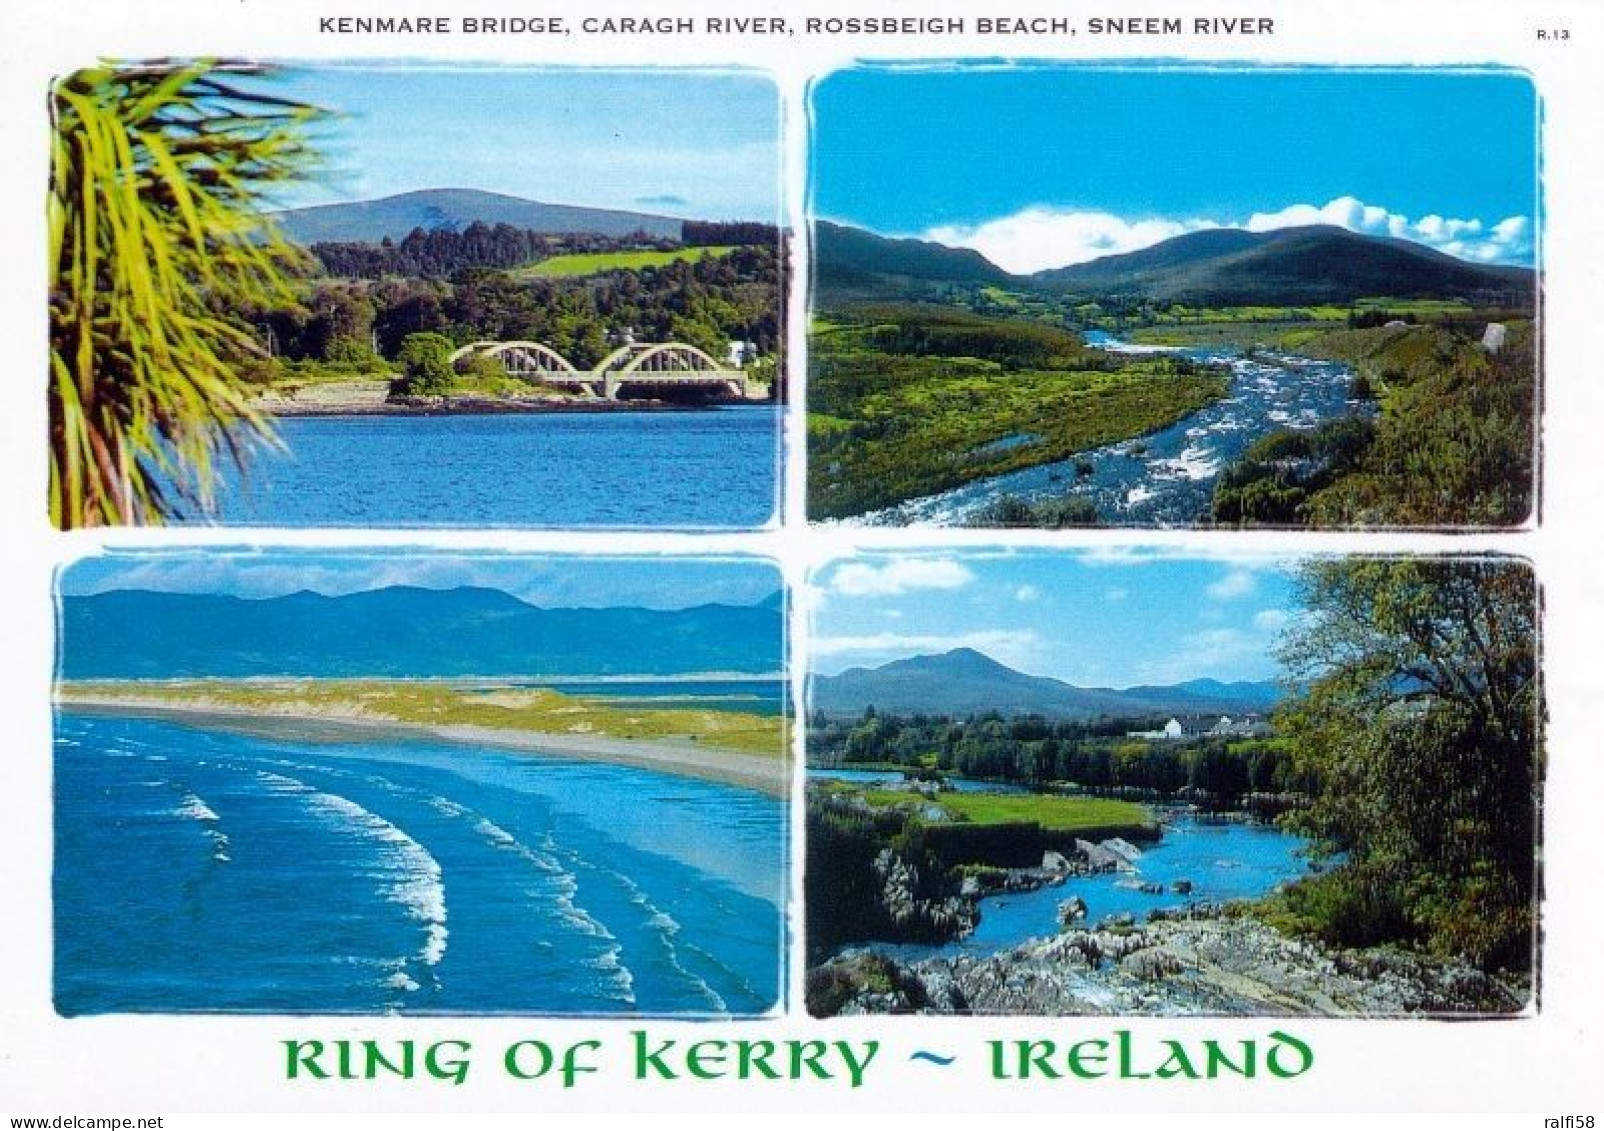 1 AK Irland / Ireland * Ring Of Kerry - Kenmare Bridge, Caragh River, Rossbeigh Beach, Snem River - County Kerry * - Kerry